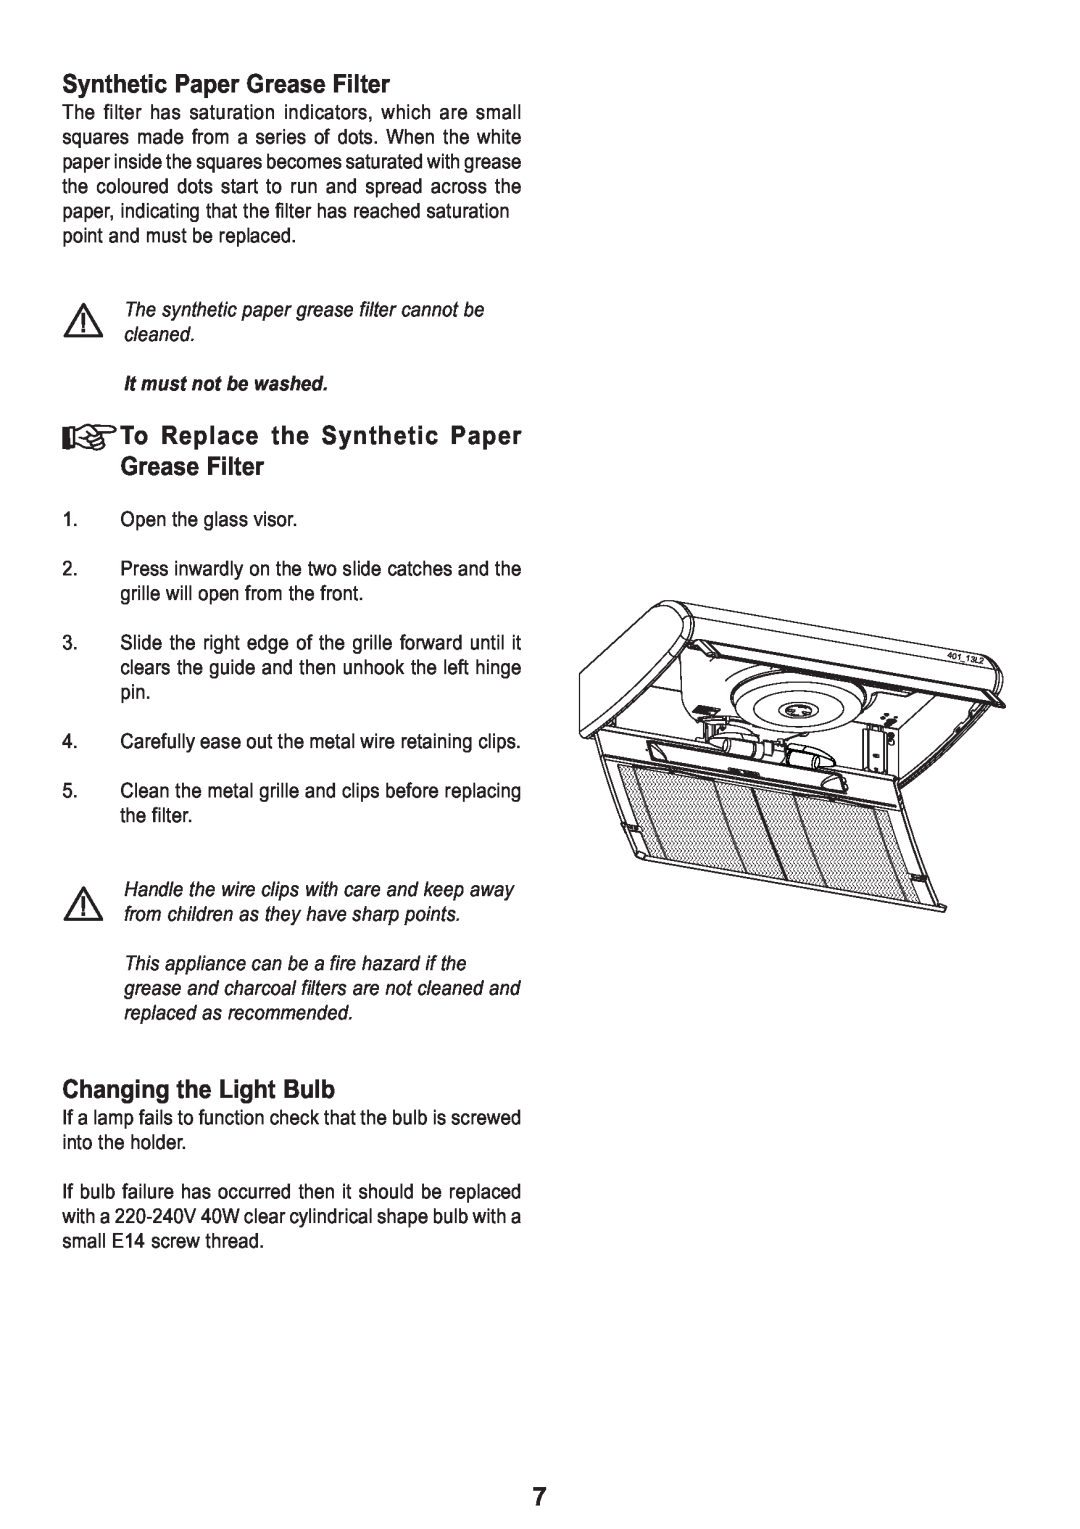 Zanussi ZHT 610 manual To Replace the Synthetic Paper Grease Filter, Changing the Light Bulb, It must not be washed 